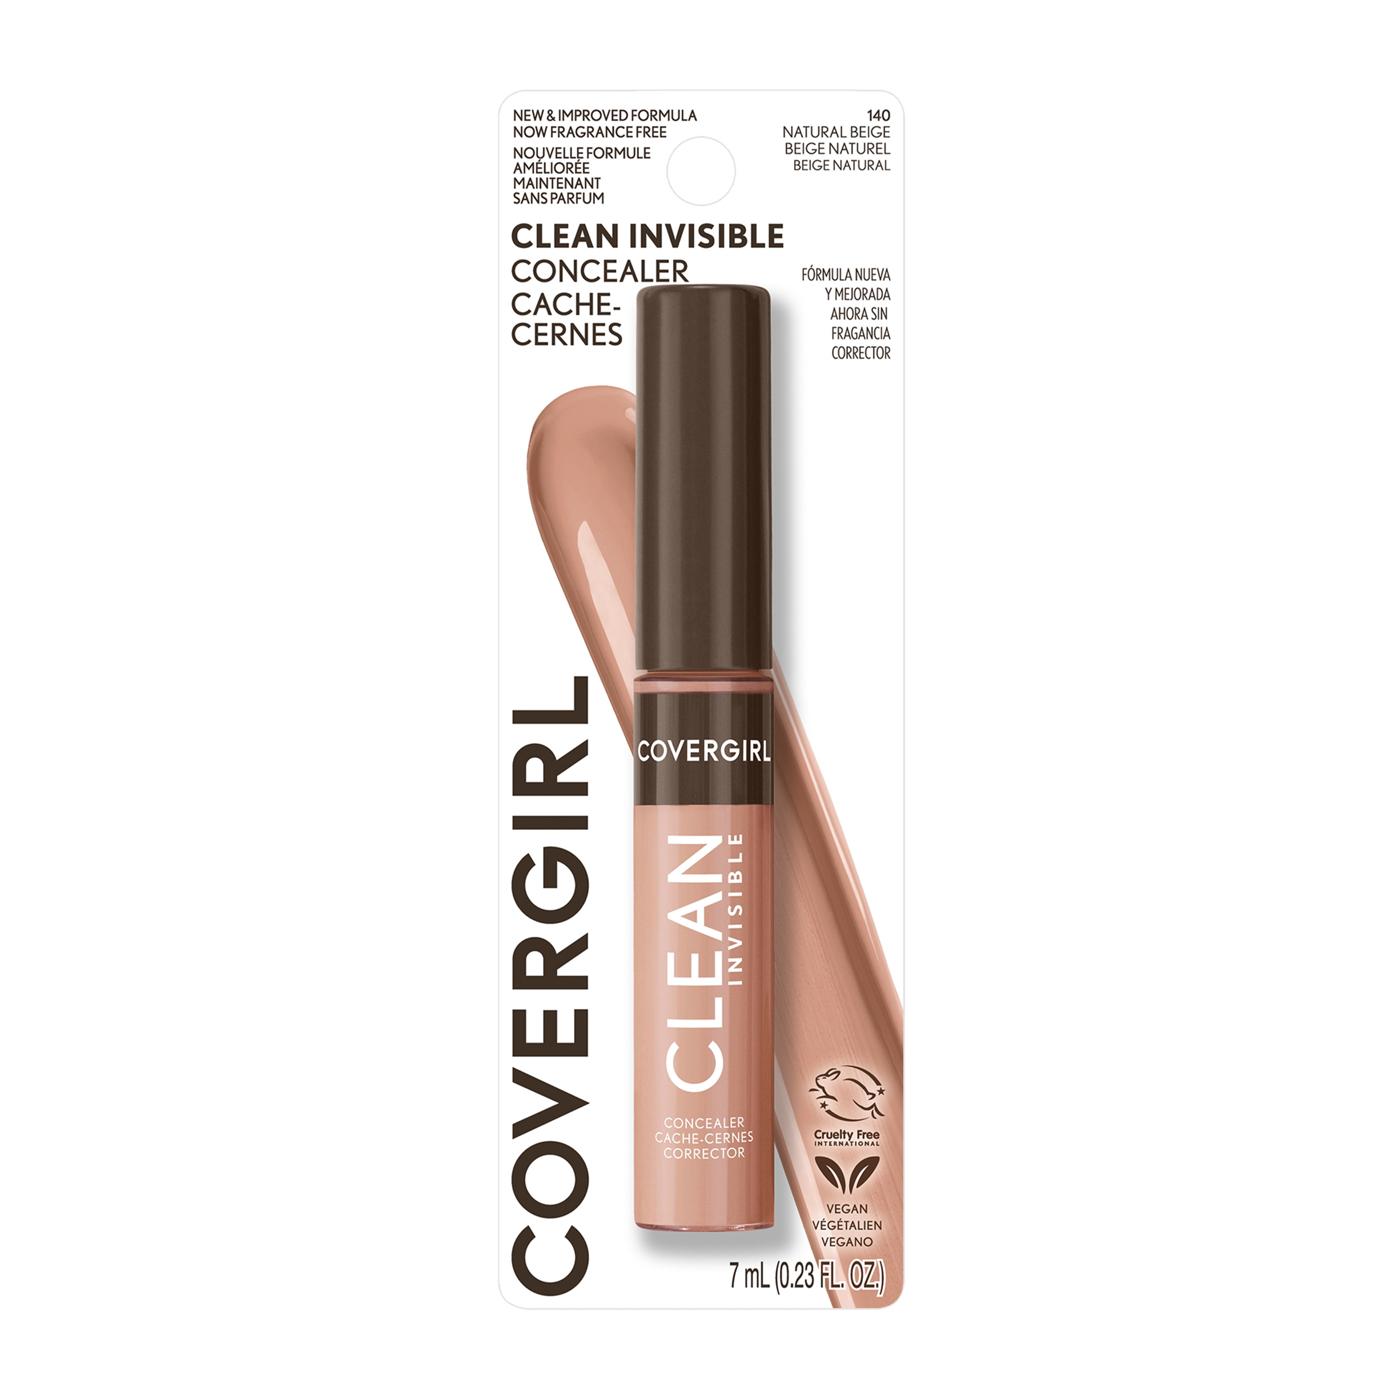 Covergirl Clean Invisible Concealer - Natural Beige; image 1 of 15